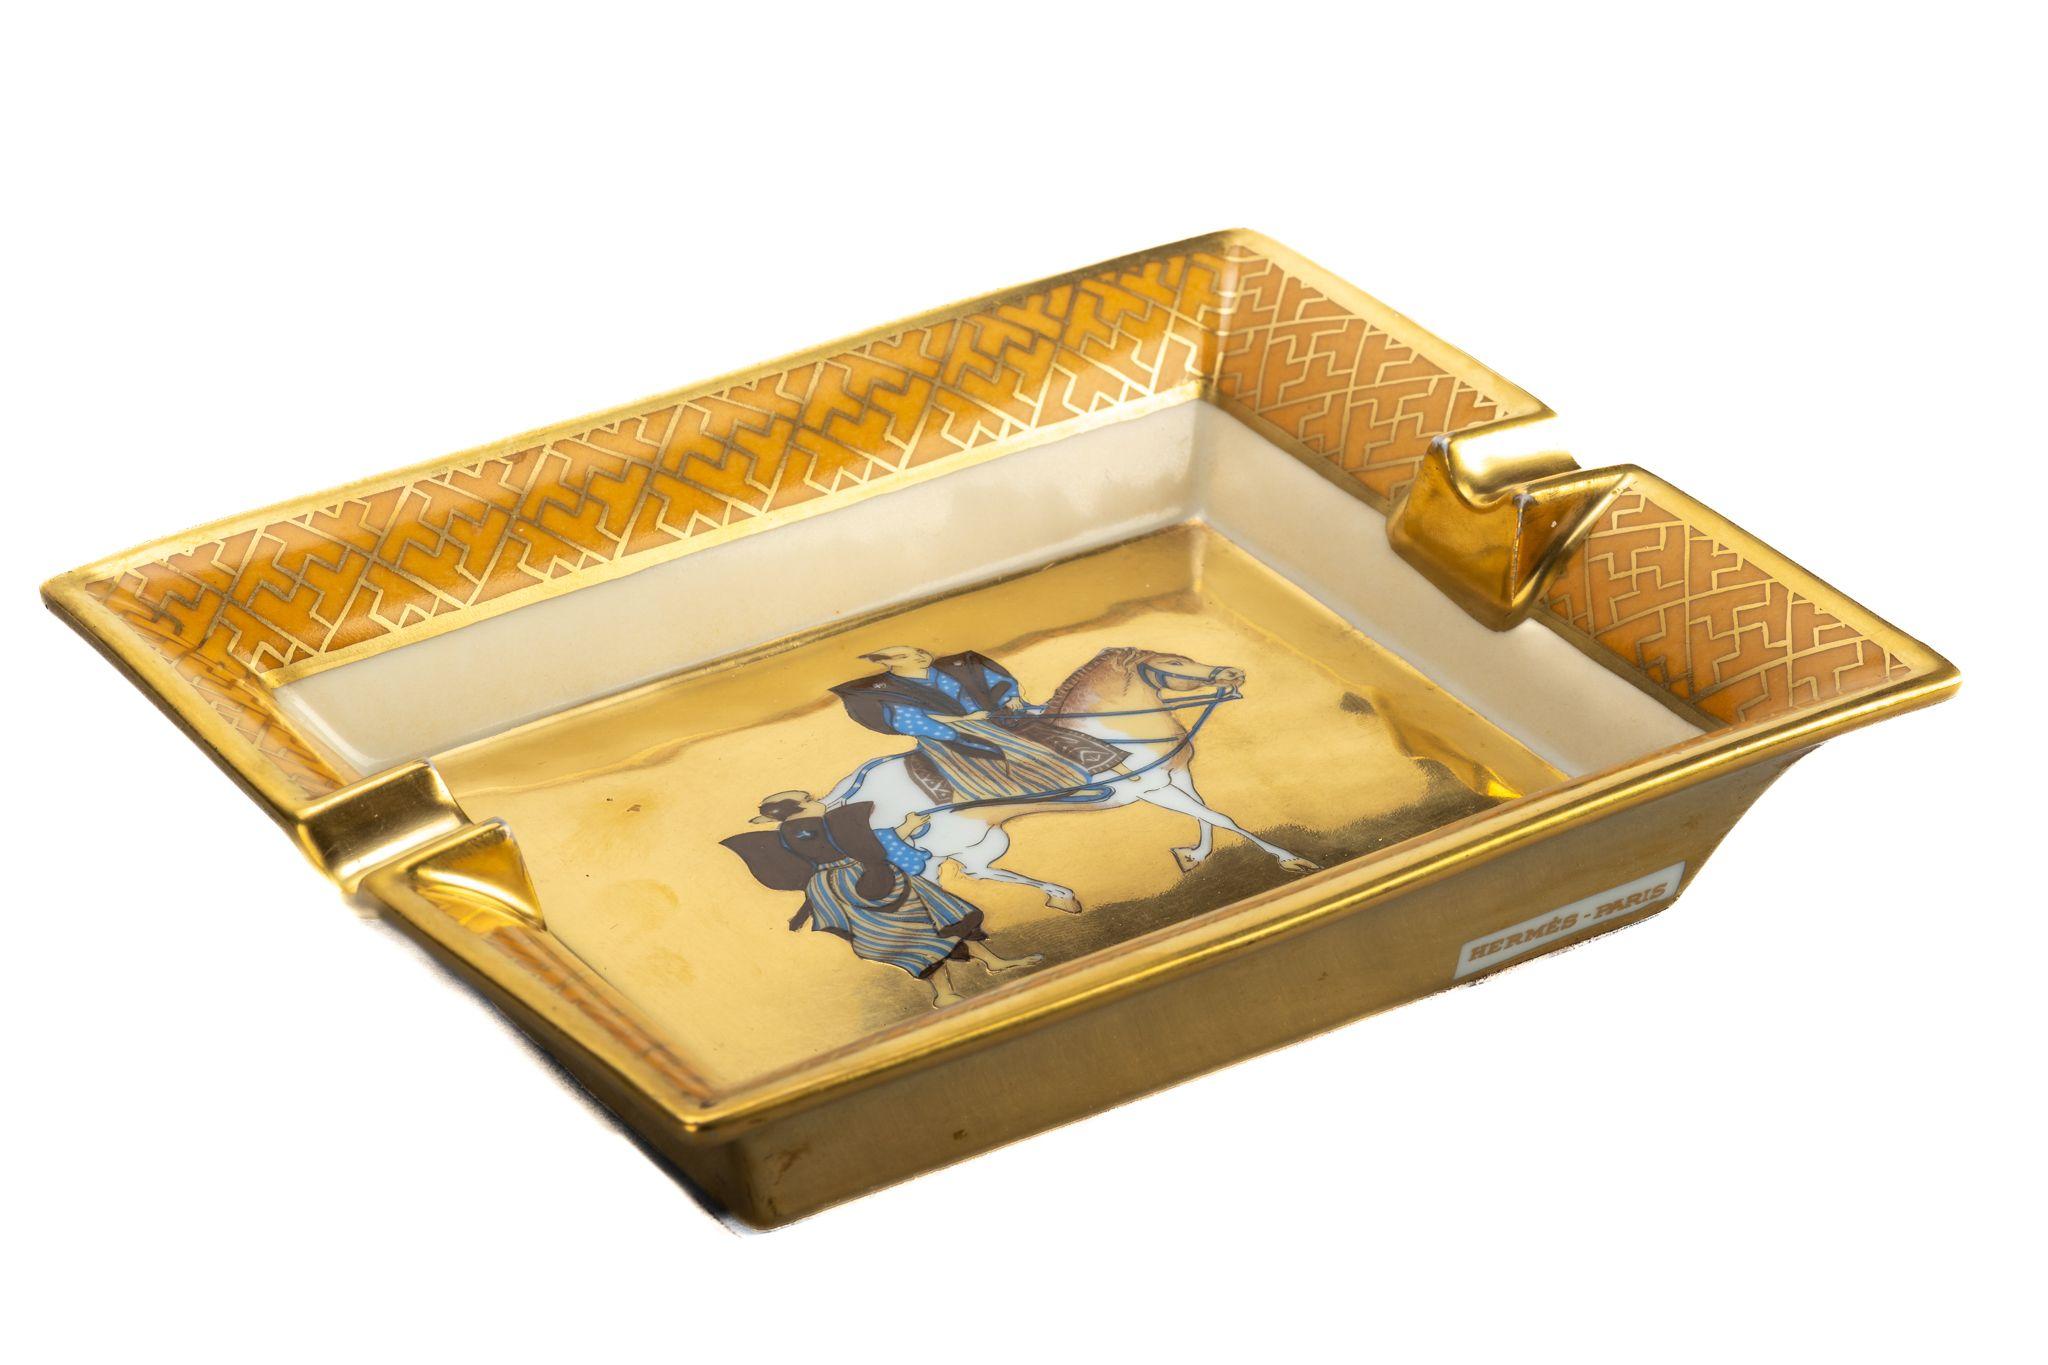 Hermes signature ashtray with samurai design in yellow  and gold. Suede stamped bottom. Minor wear on it. Made in France. Original box.